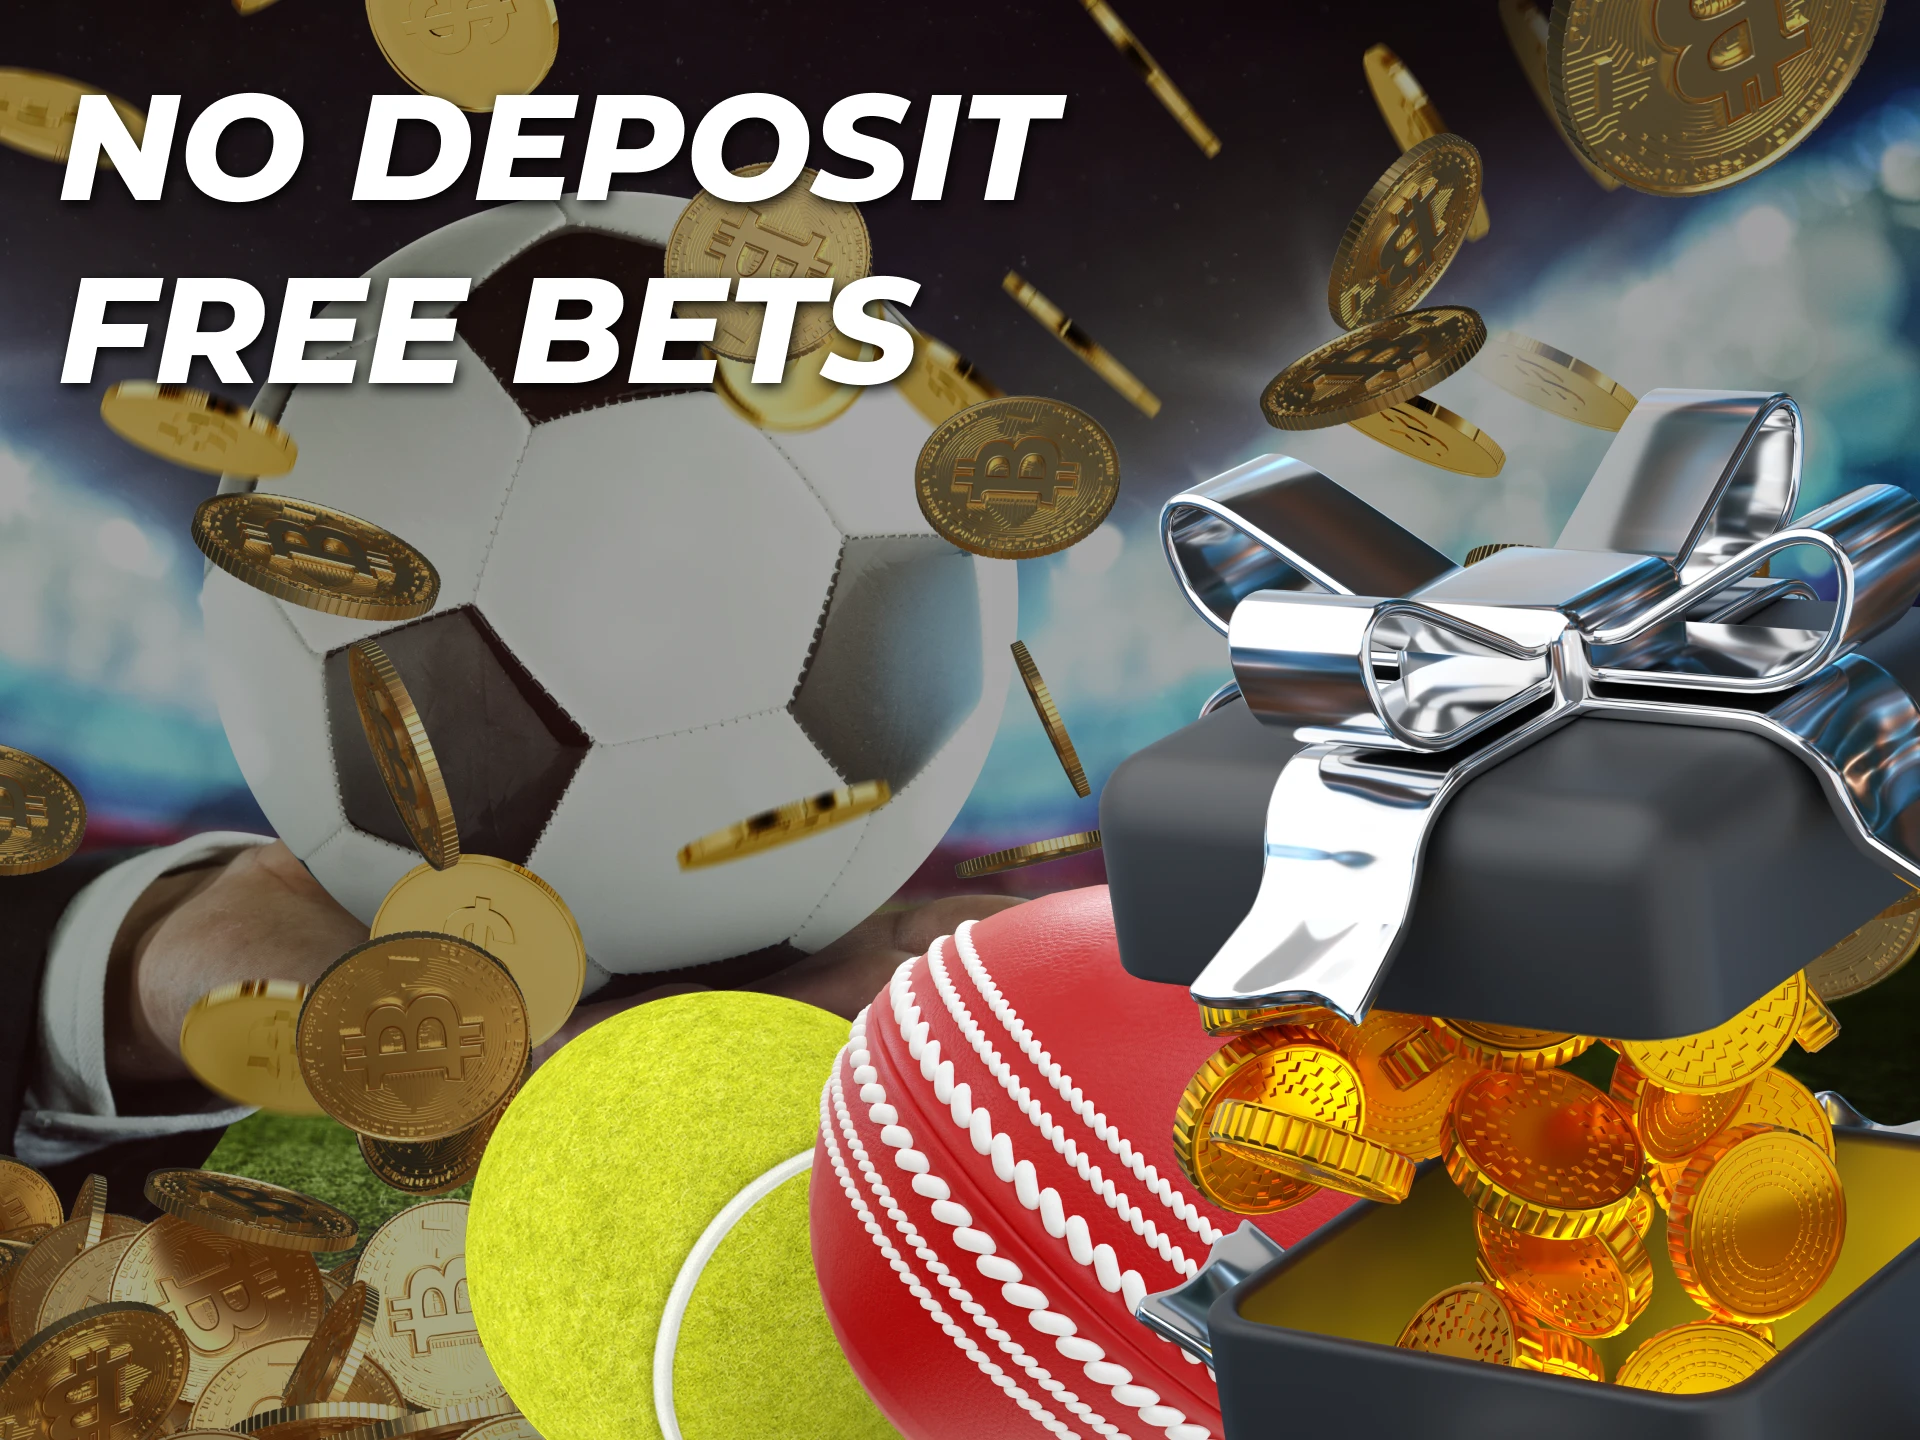 Find out if there are bookmakers that offer a no deposit bonus on free bets.